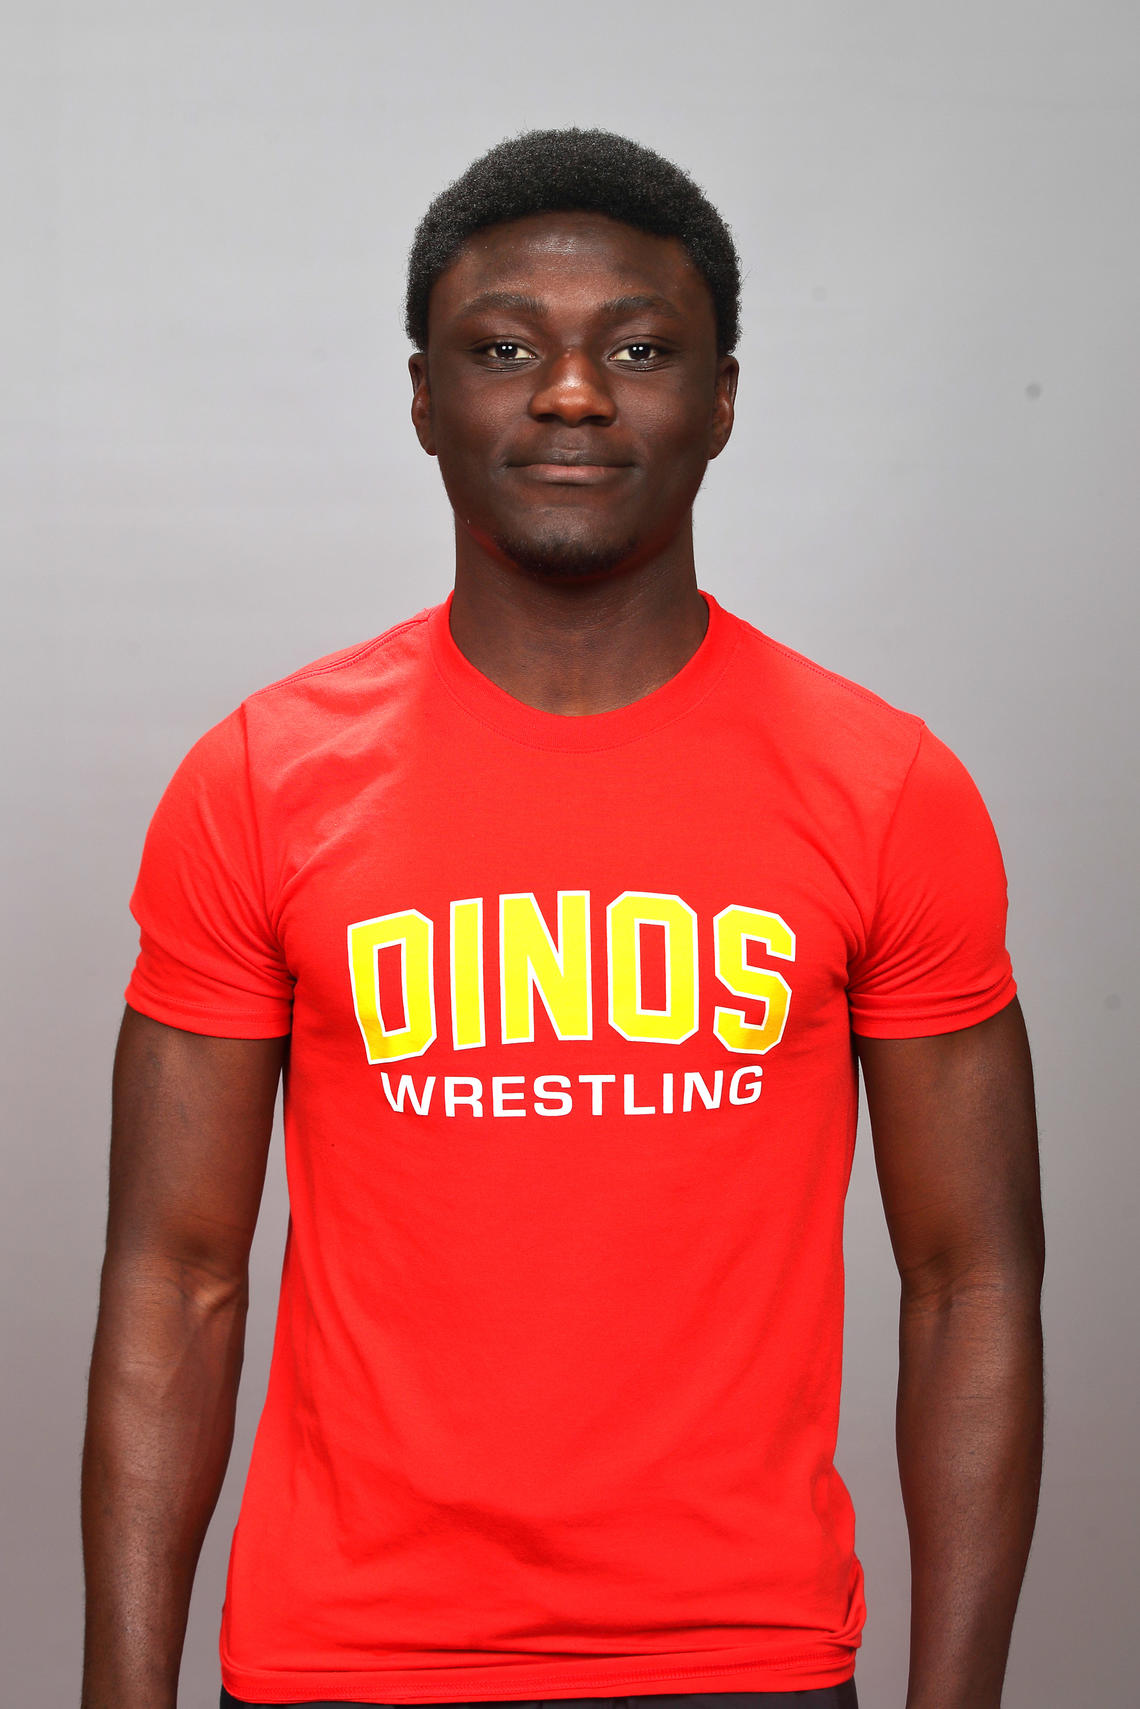 Emmanuel Olapade is a third-year Bachelor of Science in Kinesiology student and a Dinos wrestler